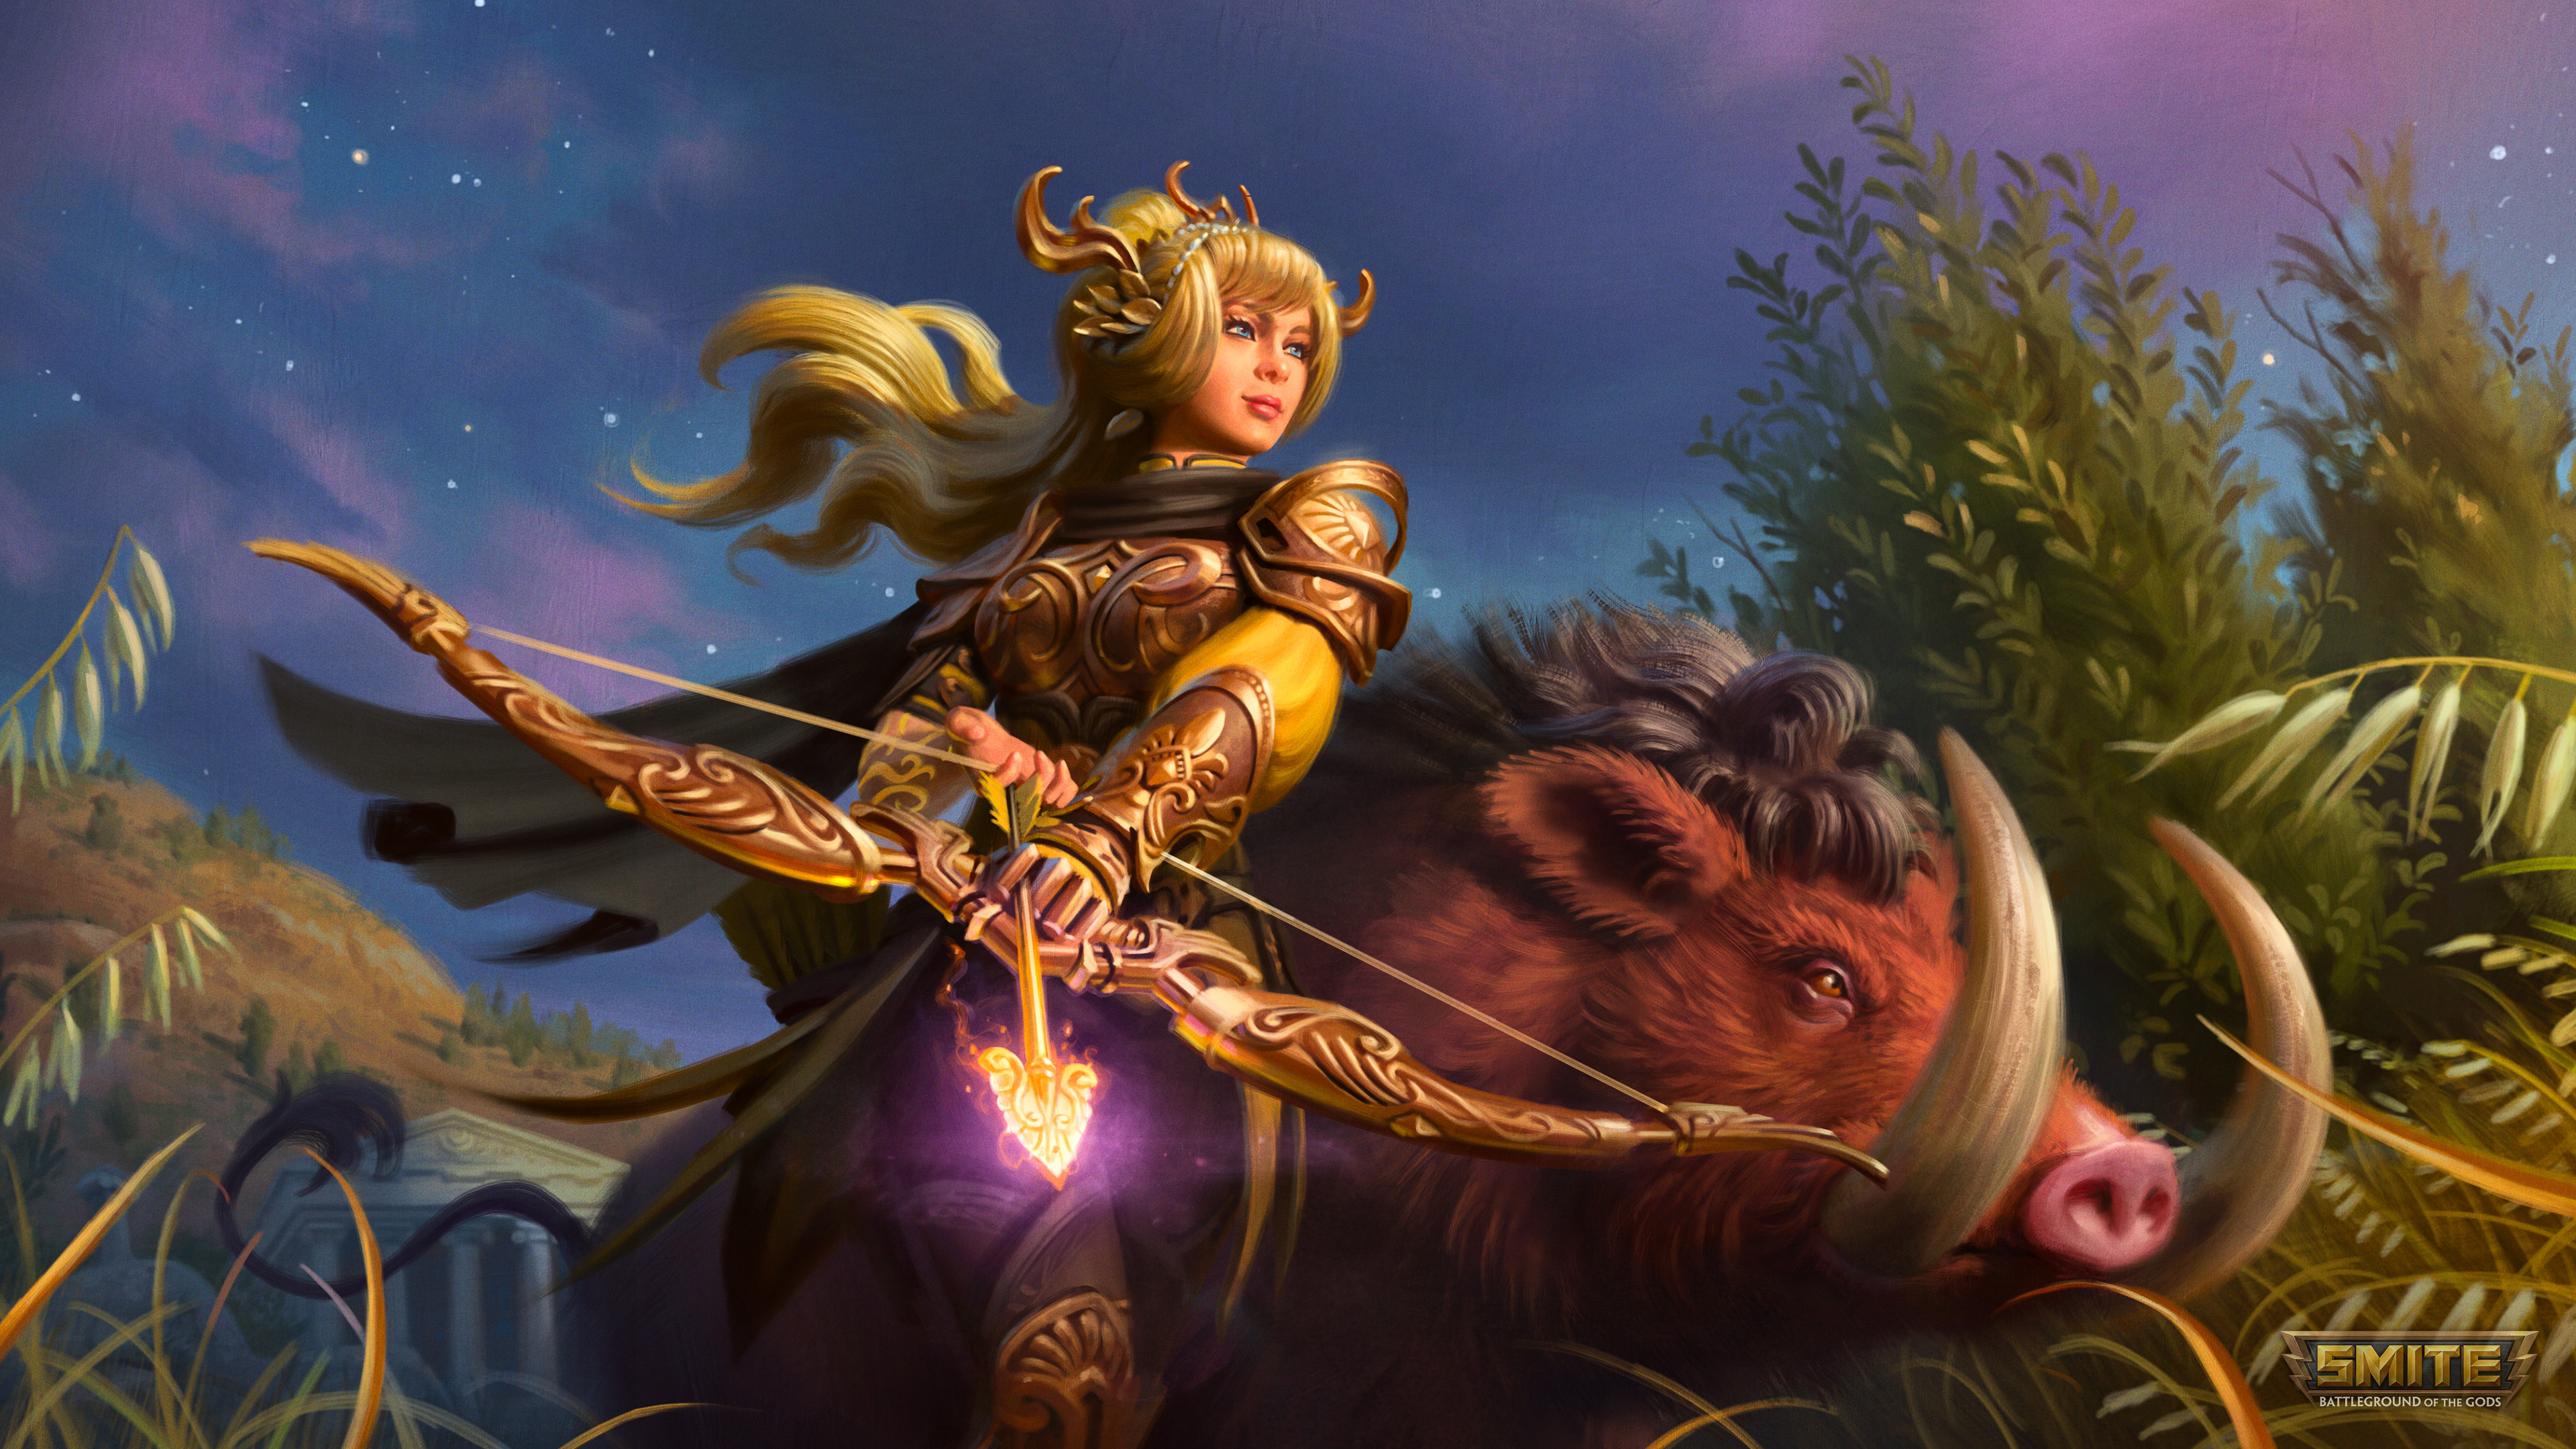 Smite Moba Video Game Characters Video Game Girls Video Game Art Video Games Boars Animals Armor Lea 3840x2160